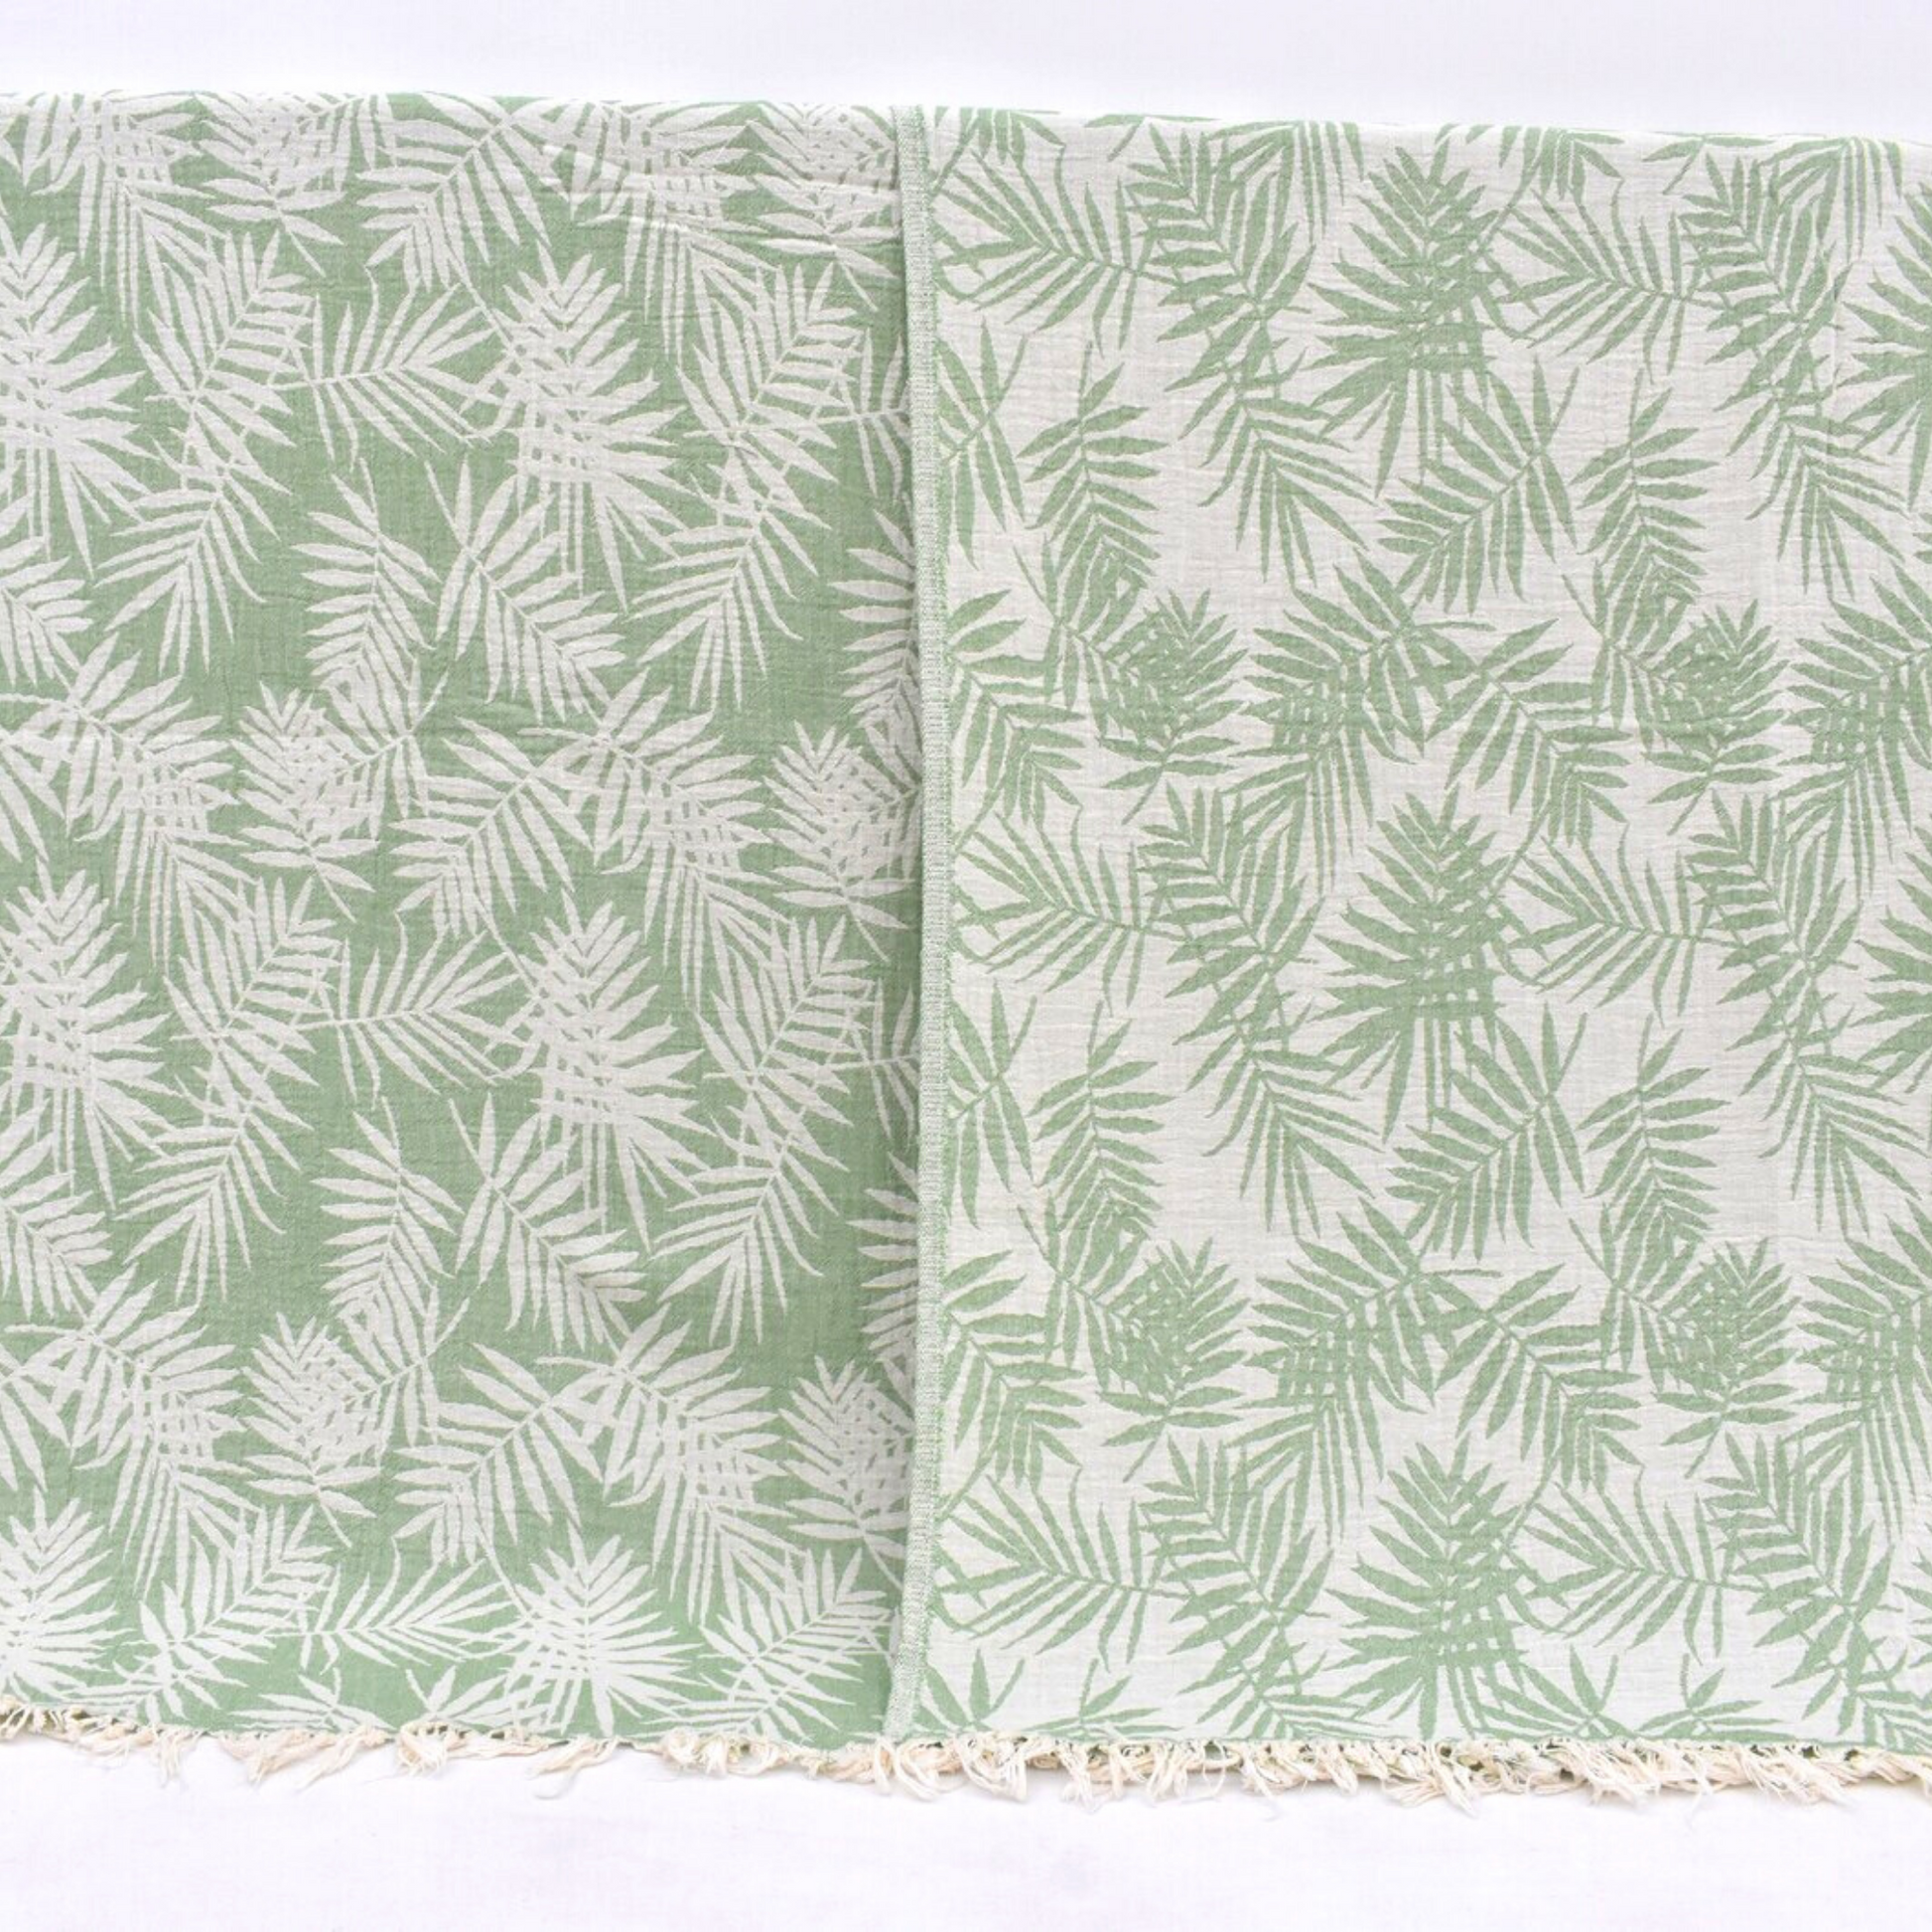 LEAVES Blanket with reversible pattern